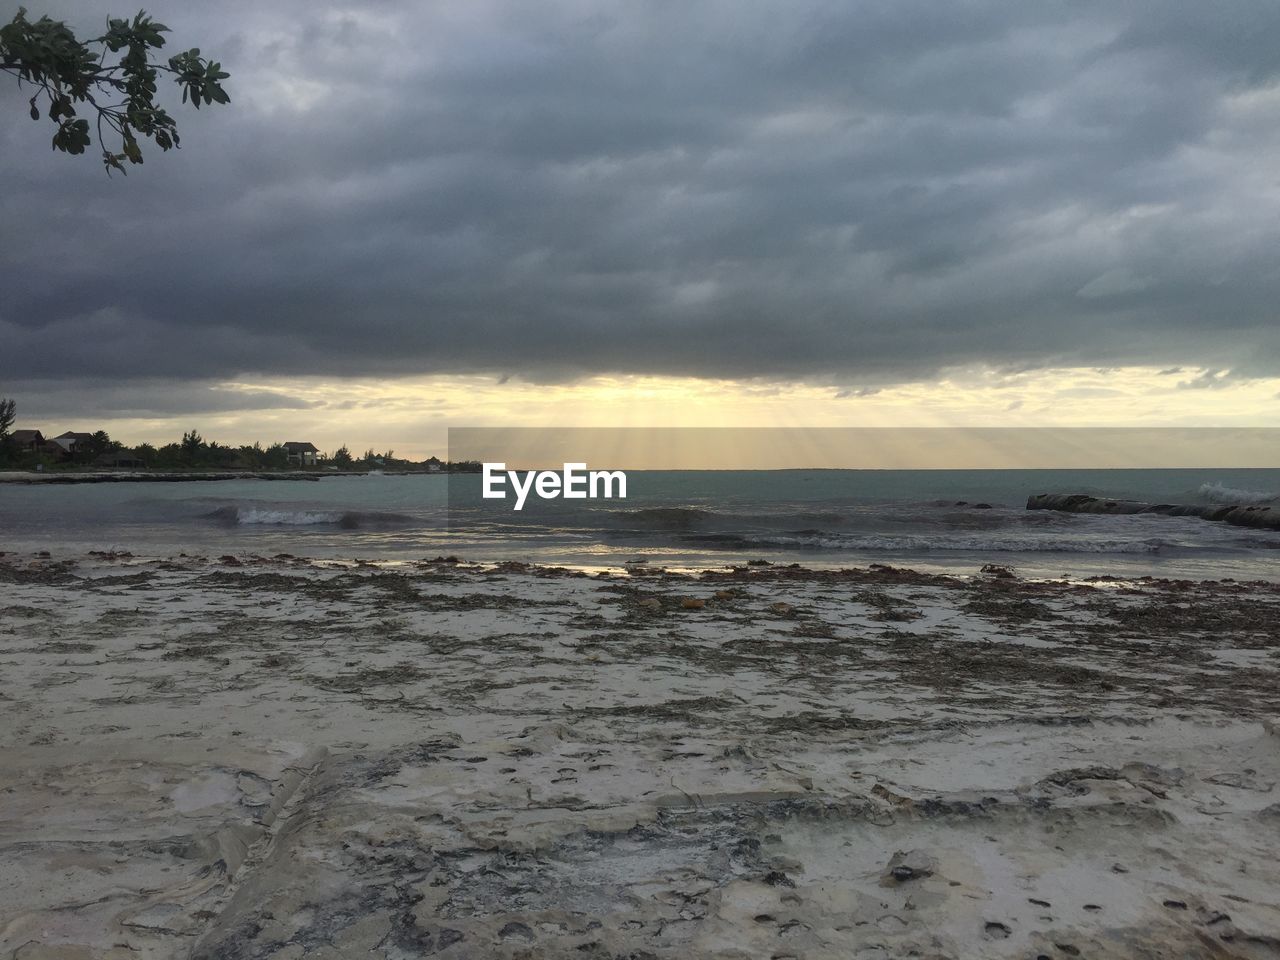 SCENIC VIEW OF SEA AGAINST STORM CLOUDS